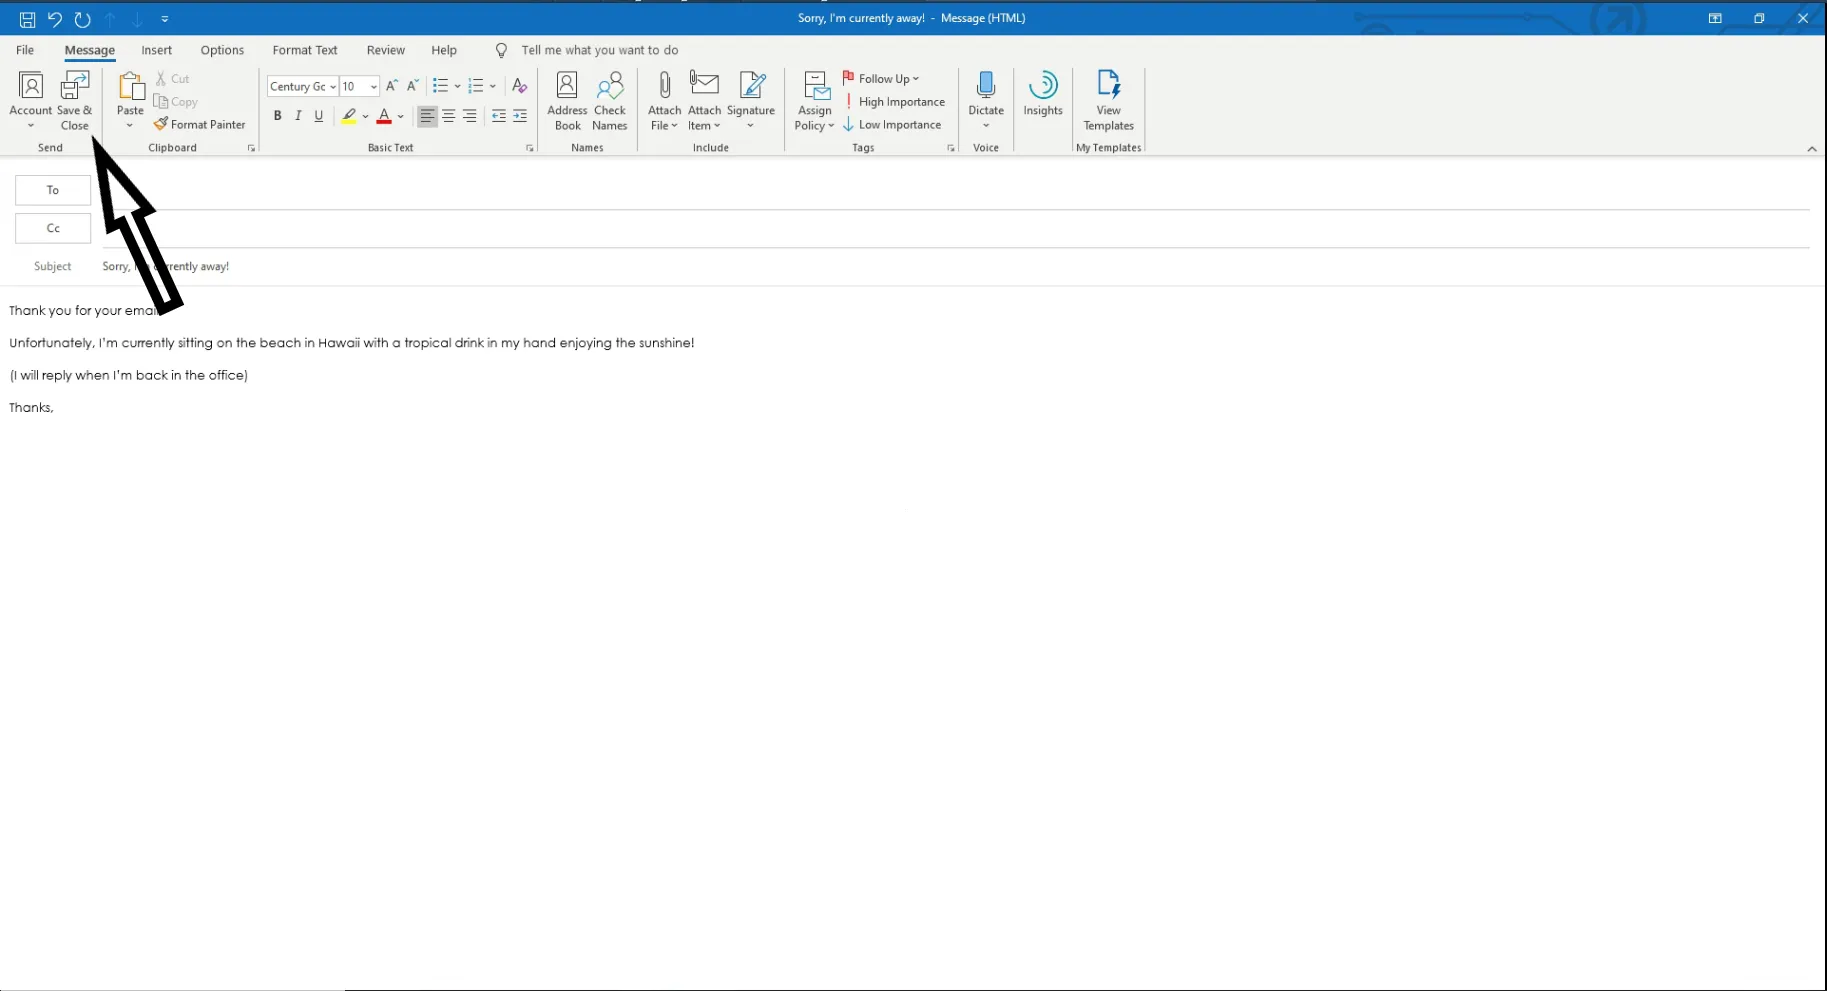 How to set up recurring Out of Office auto-reply for certain days of the week in Outlook 2016